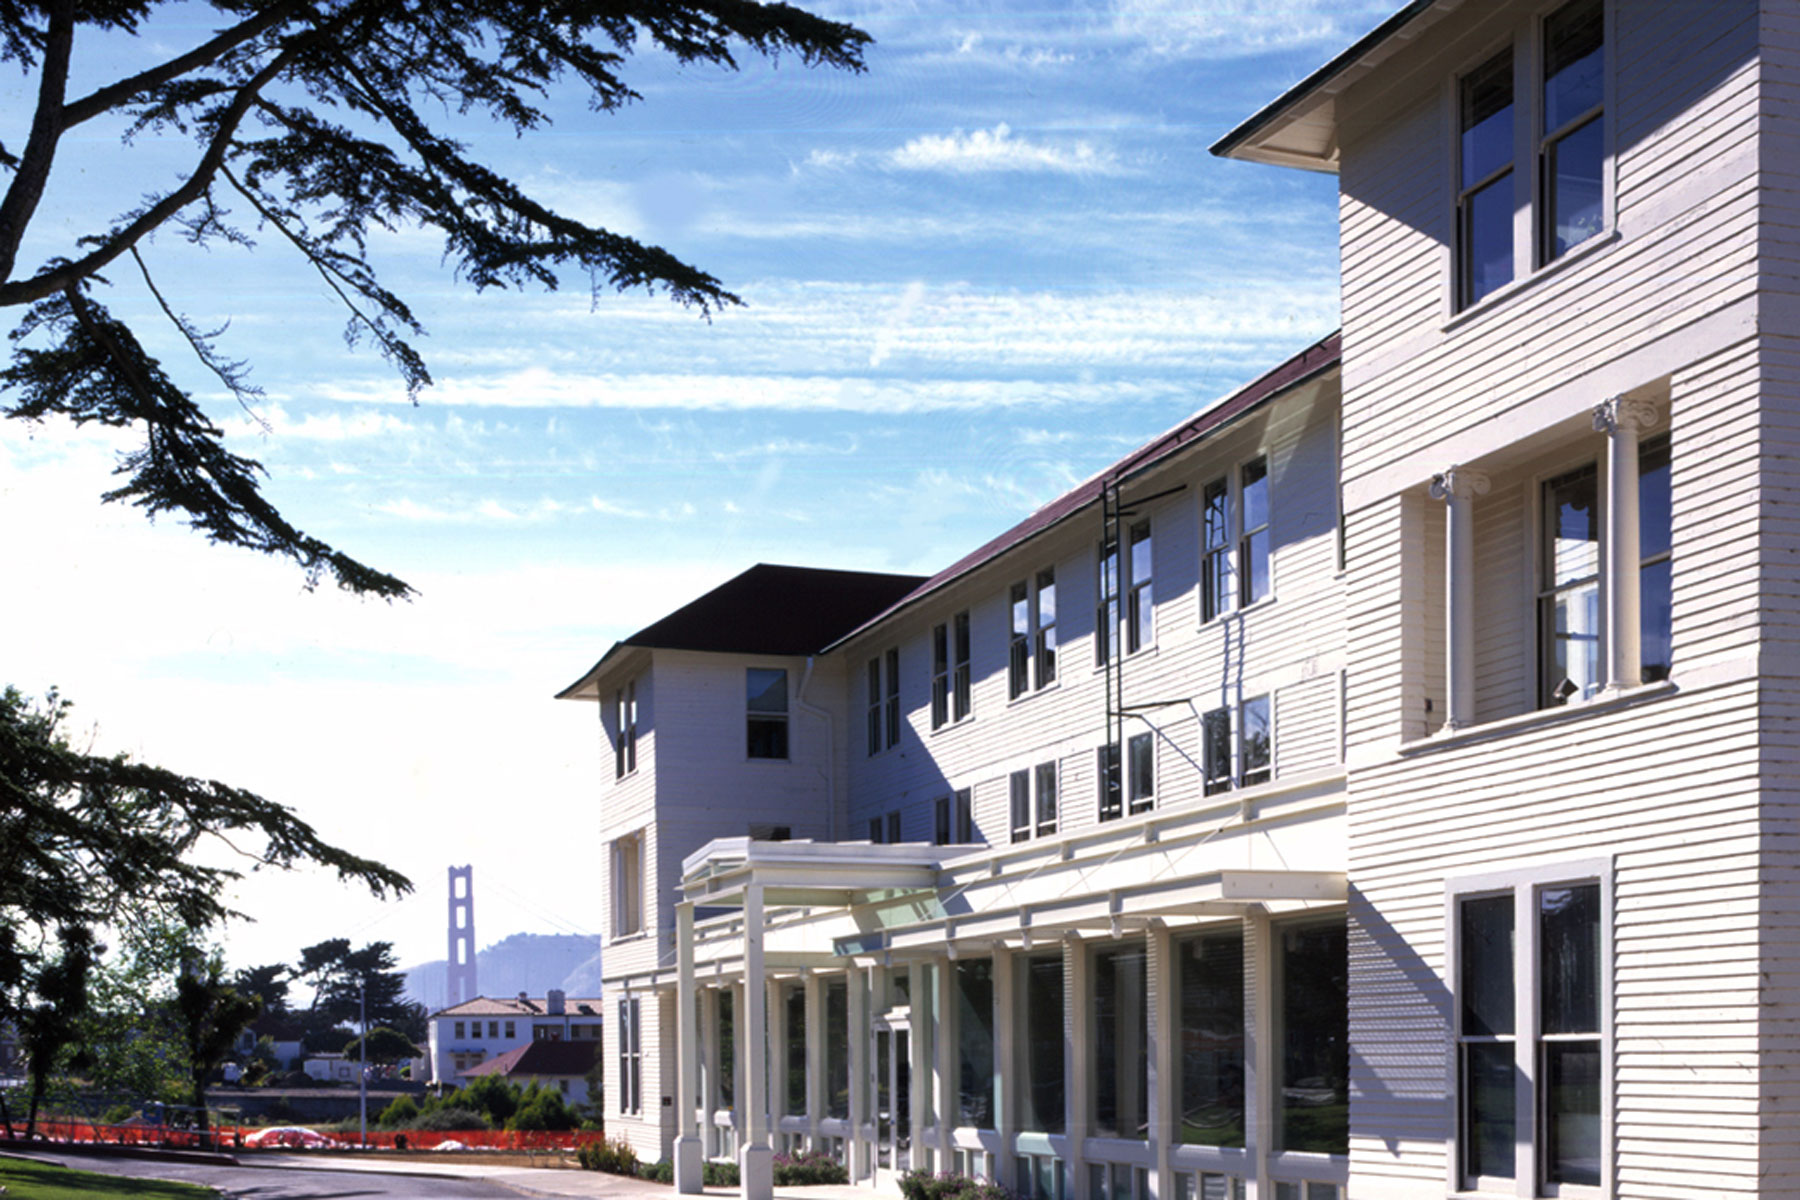 The Thoreau Center for Sustainability in San Francisco is a landmark renovation of the historic Army Hospital in the Presidio, and one of the first public/private partnership projects in the new National Park. This non-profit center is a national model for integrating sustainable design strategies within the National Register historic structures.